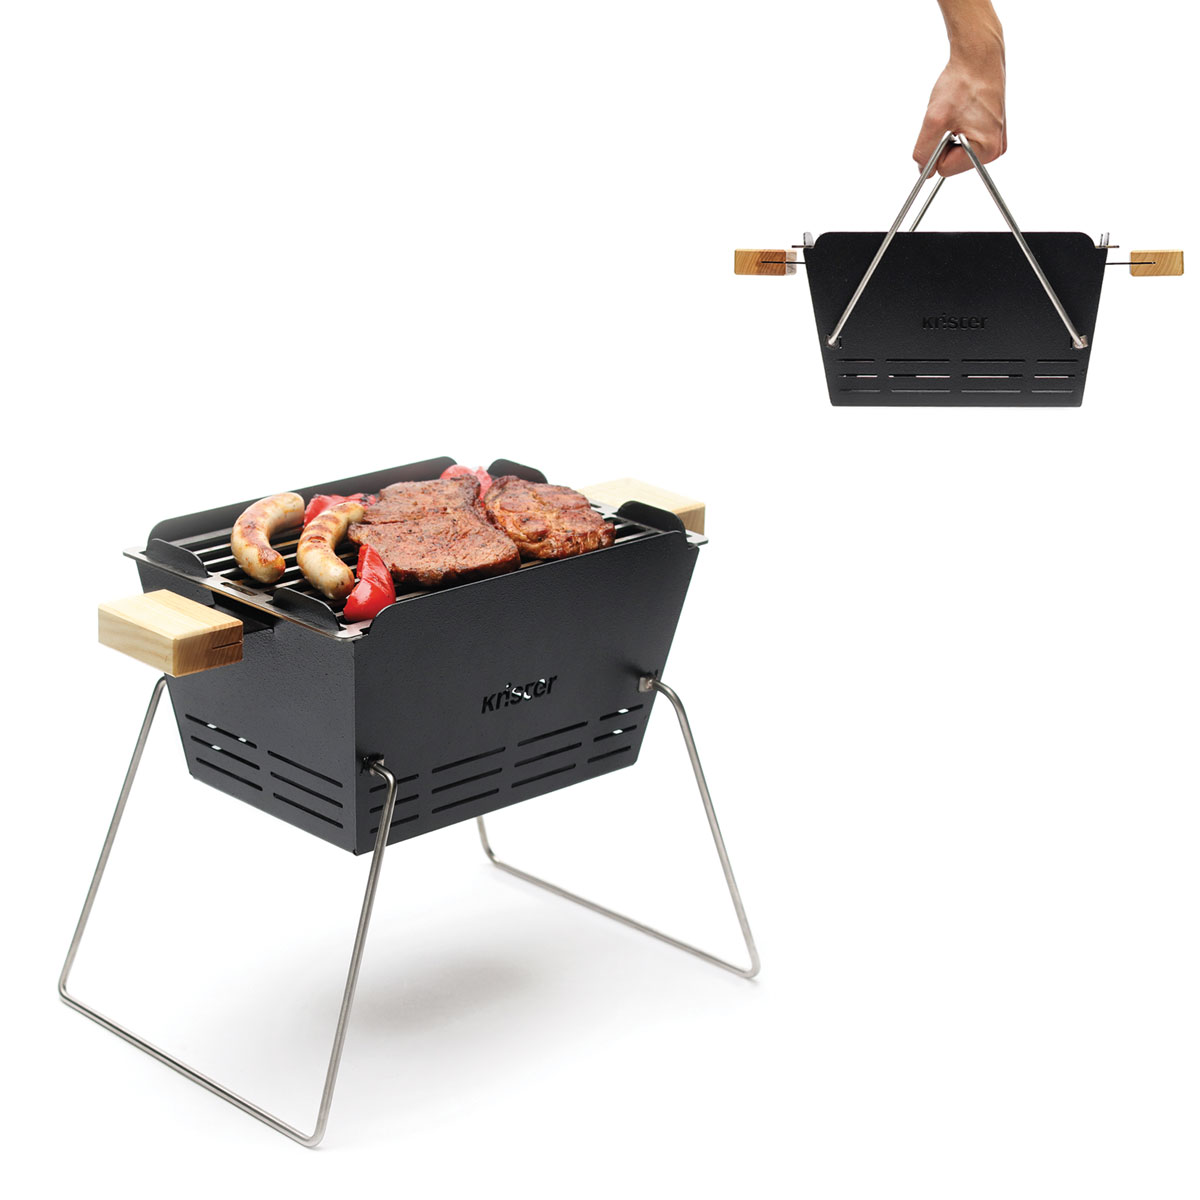 Knister Grill Small – tragbarer Holzkohlegrill